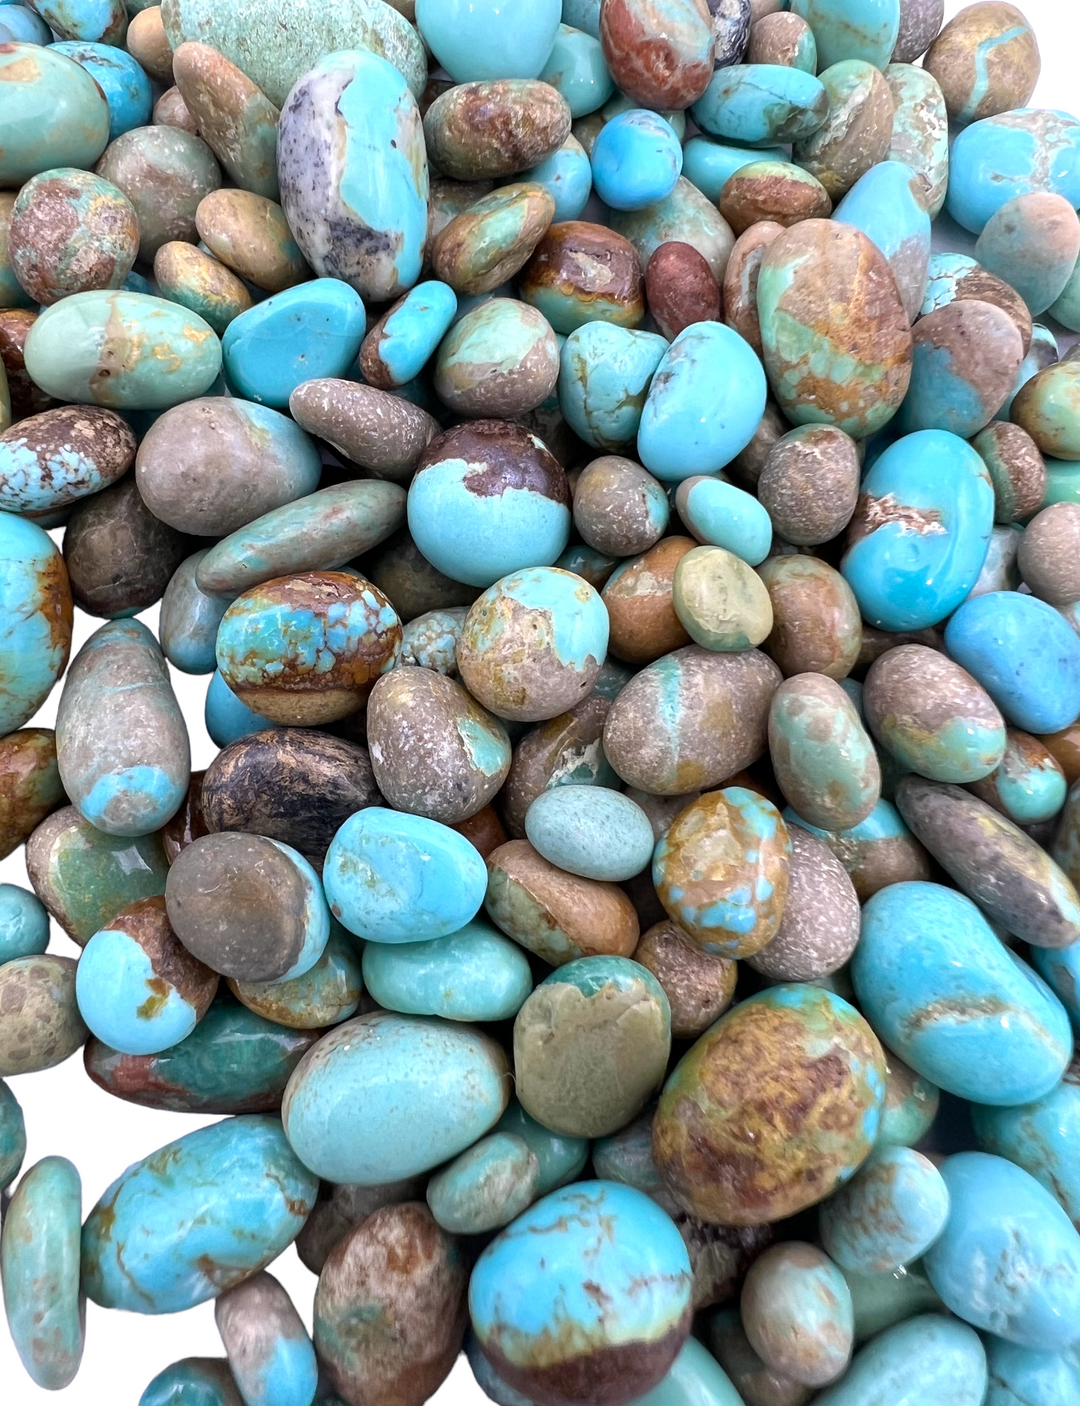 RARE Number 8 Turquoise 8-12mm Tumbled Nuggets Undrilled